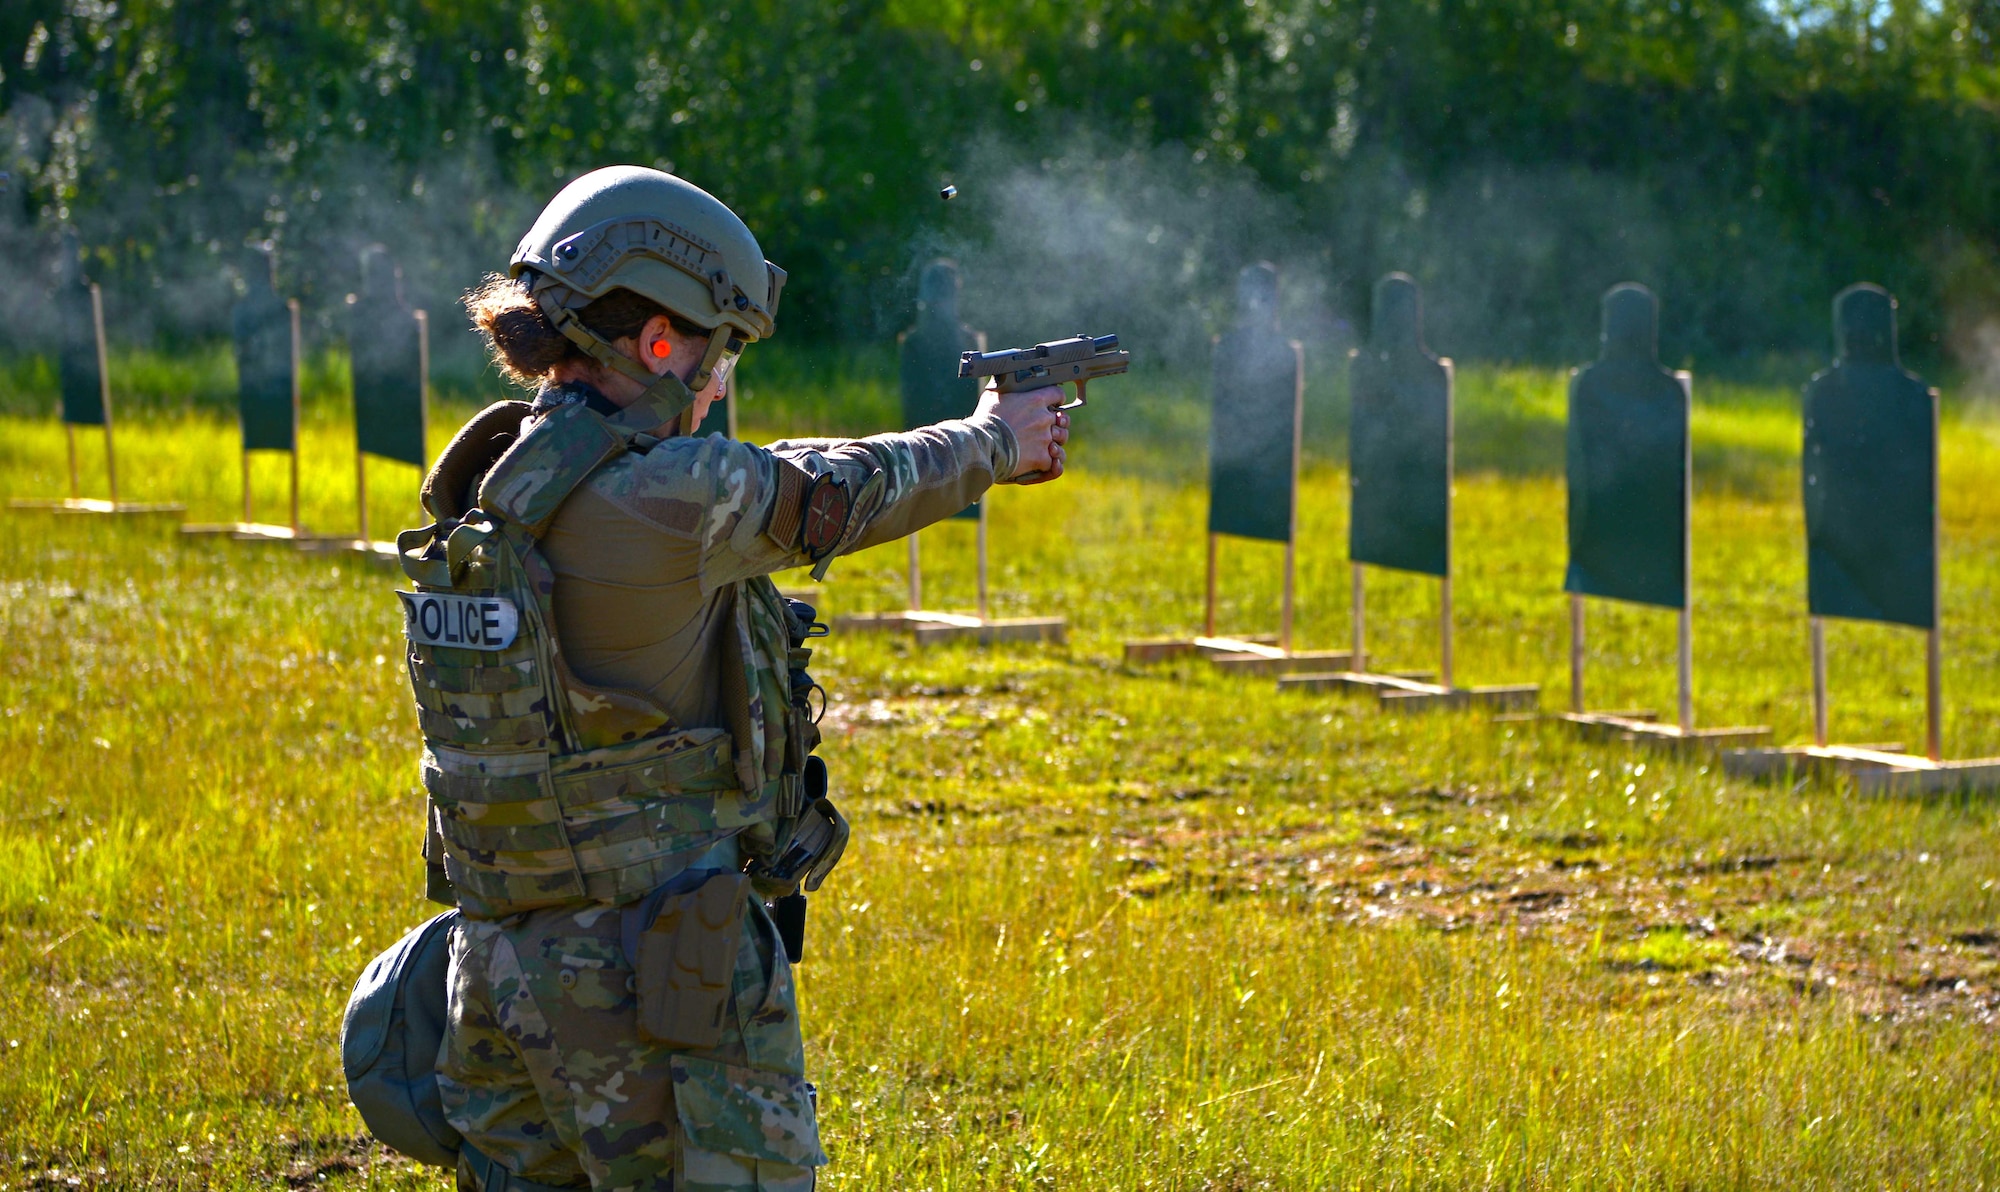 U.S. Air Force Airman 1st Class Alex Soto, a 354th Security Forces Squadron installation entry controller fires her weapon at a target during special weapons and tactics (SWAT) training June 23, 2021 on Eielson Air Force Base, Alaska. SWAT team members are required to be proficient marksmen to prevent mistakes in chaotic situations, such as an active shooter scenario. (U.S. Air Force photo by Senior Airman Beaux Hebert)